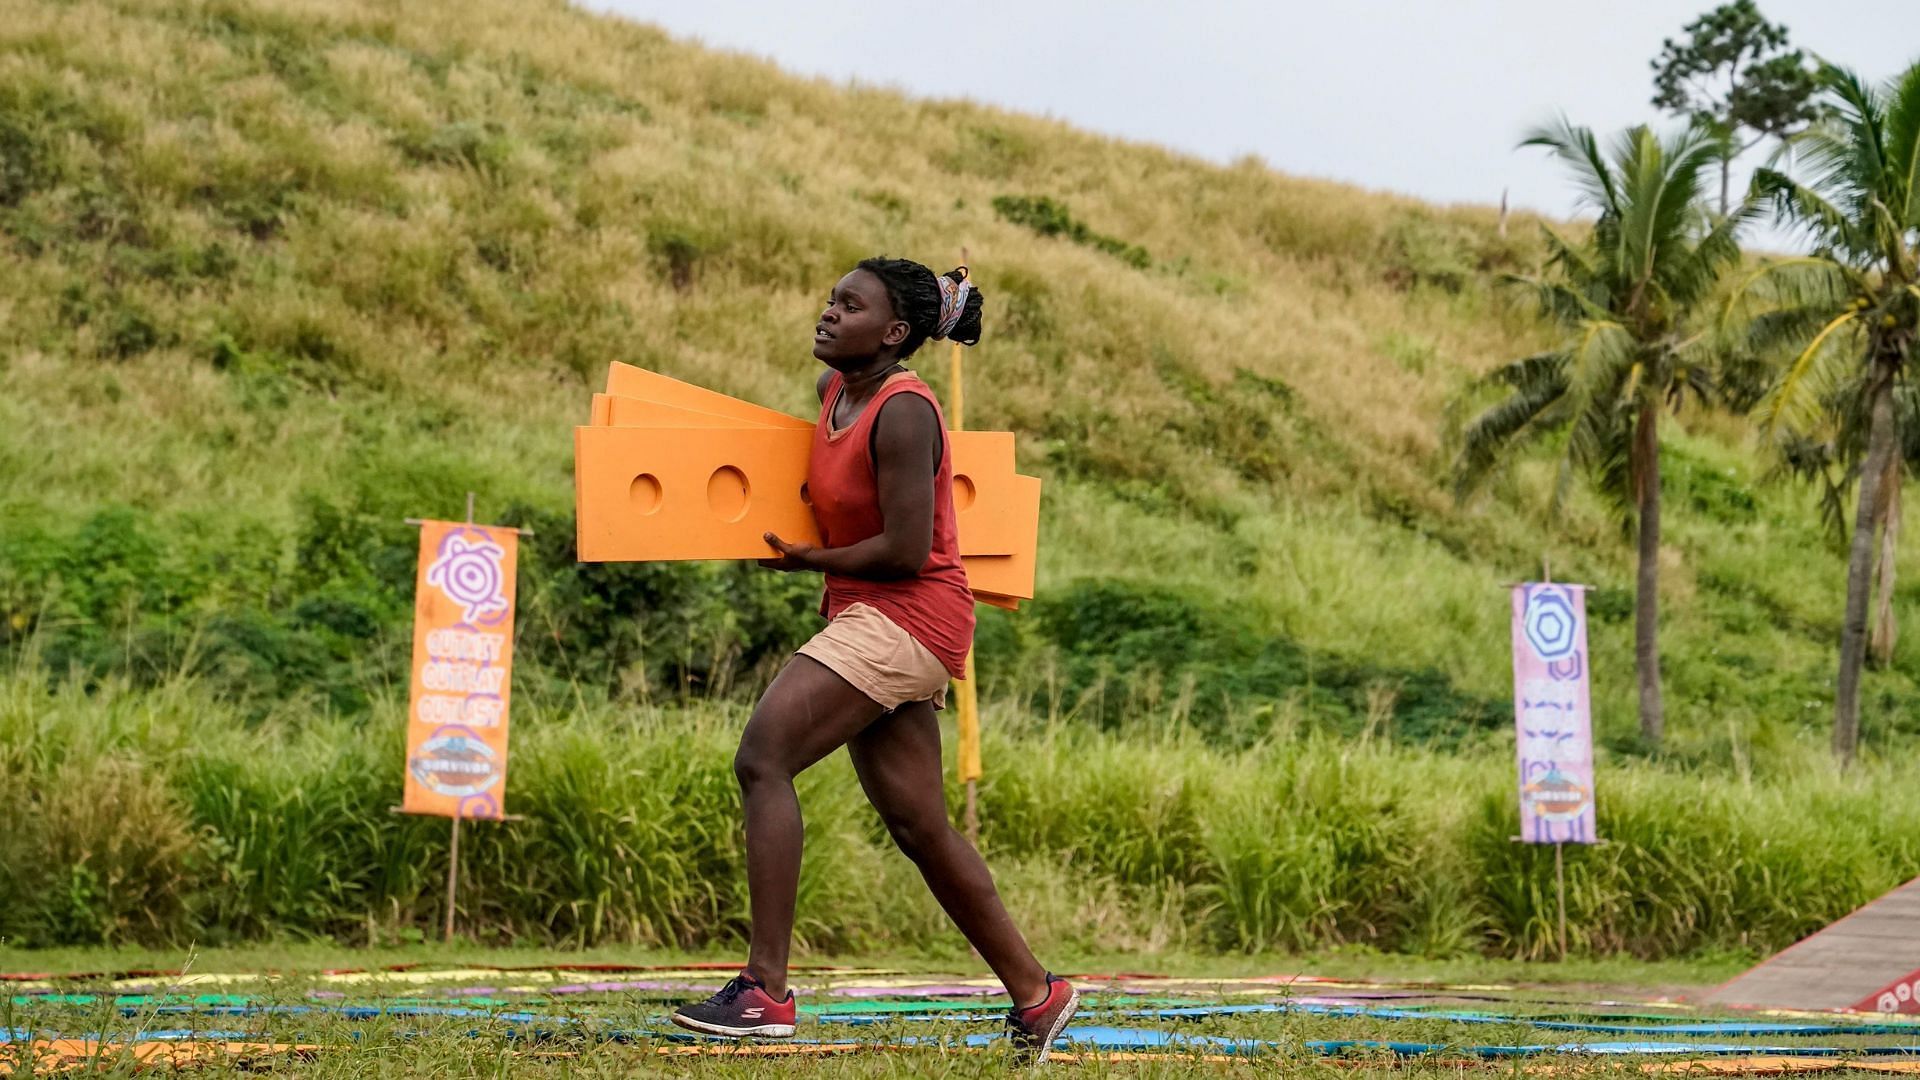 Maryanne comes in strong into the game on Survivor (Image via @survivorcbs/Twitter)